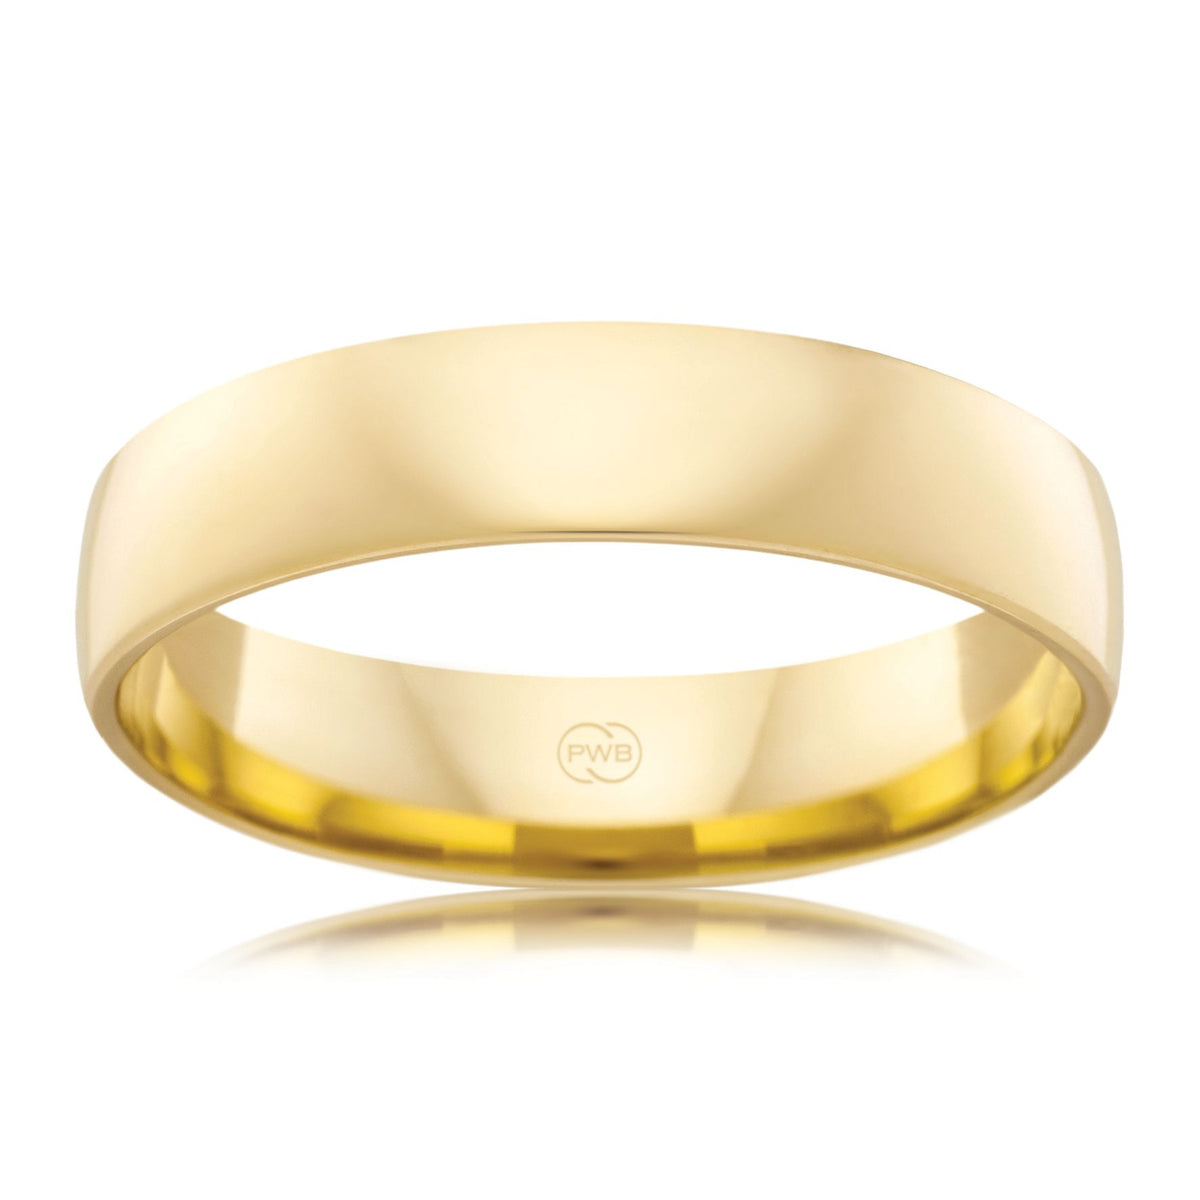 9ct Yellow Gold 5.5mm Wedding Ring - Duffs Jewellers